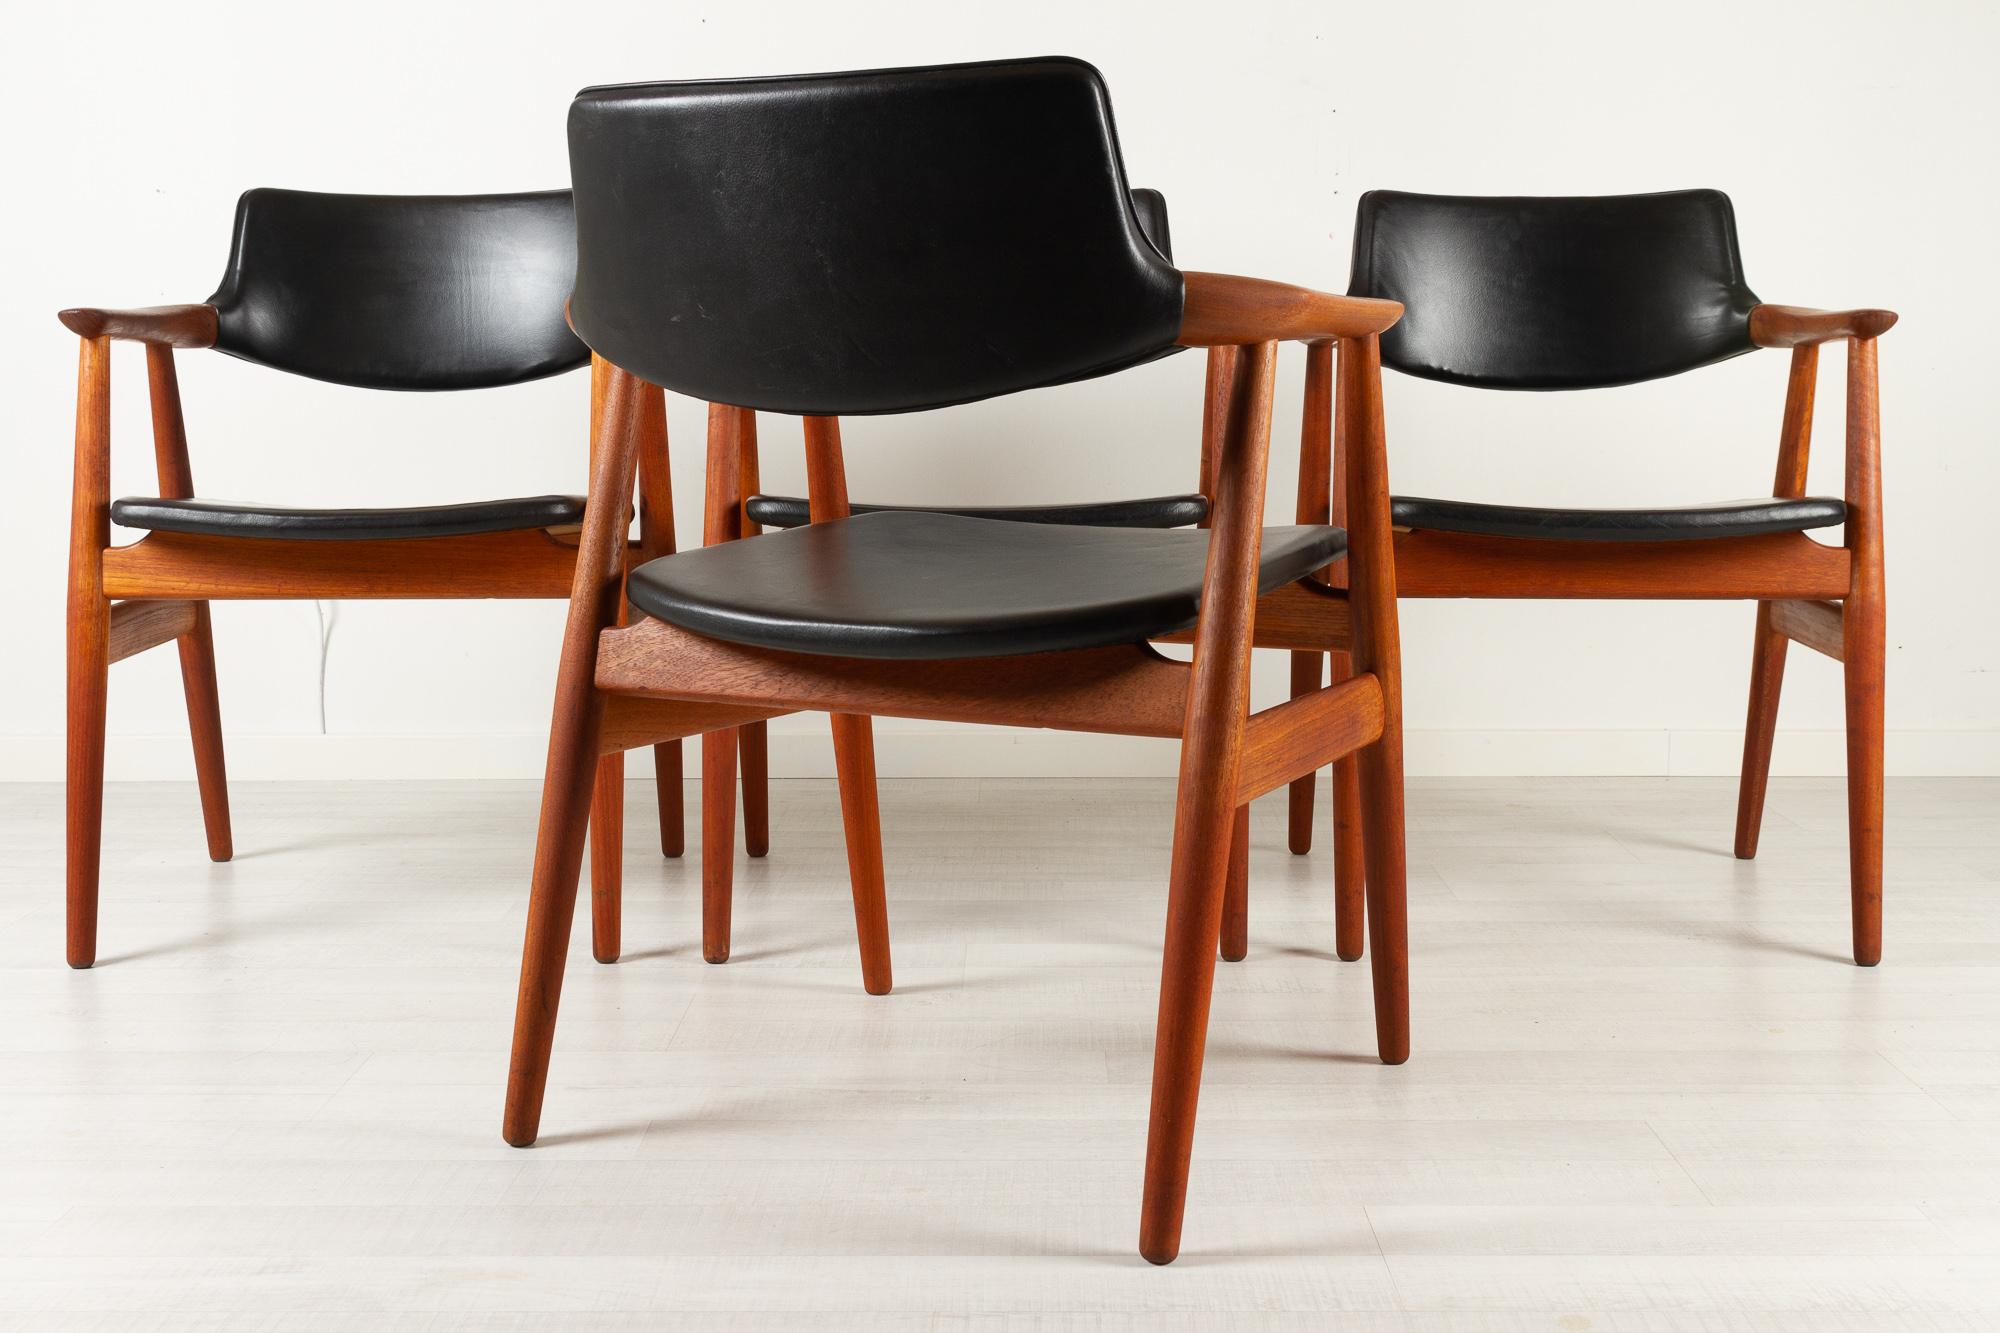 Leather Vintage Danish Teak Armchairs GM11 by Svend Aage Eriksen 1960s Set of 4 For Sale